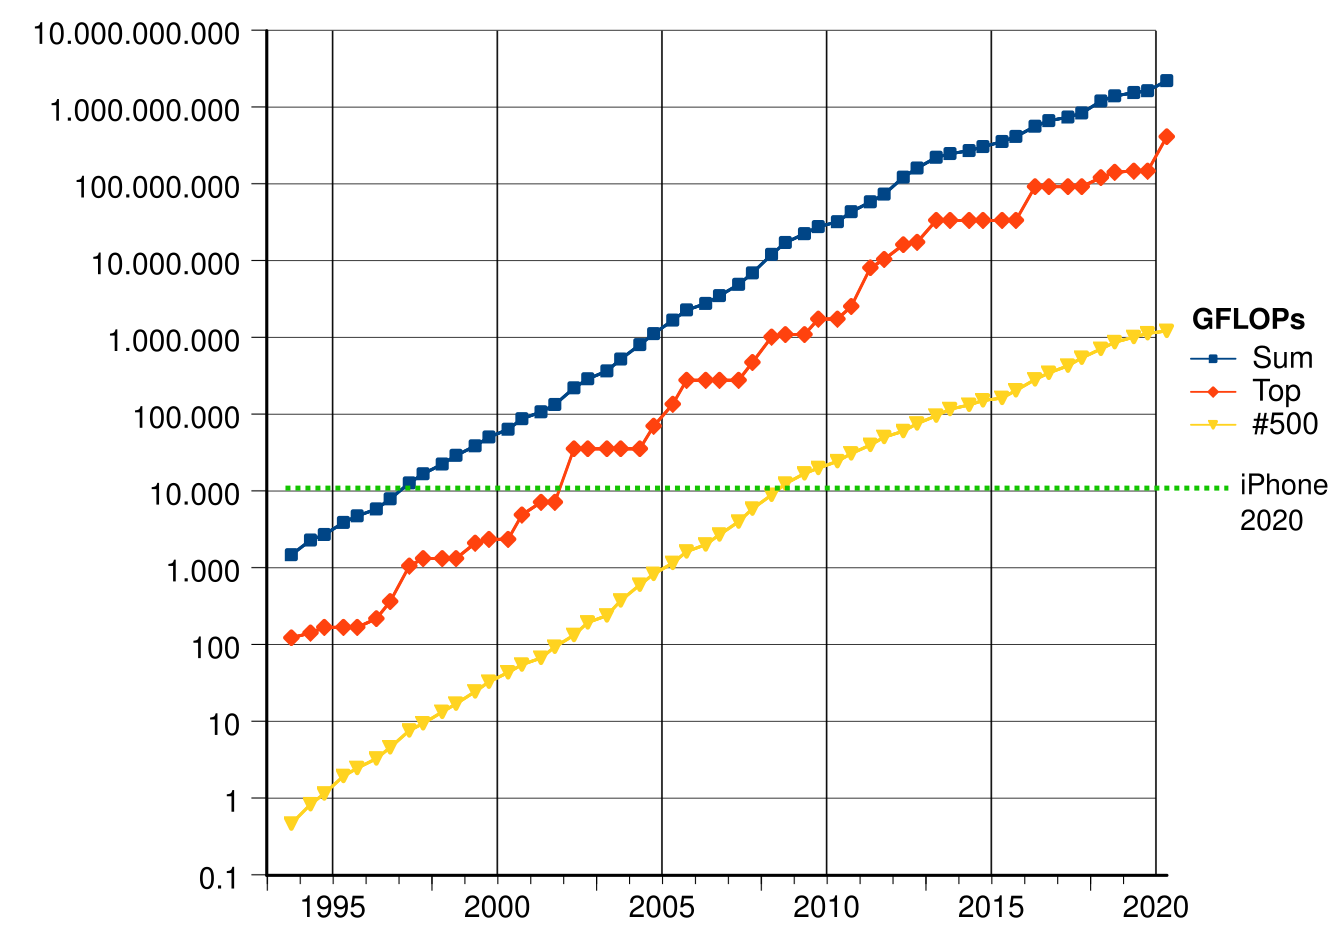 iPhone, A14 chip, 2020 in comparsion with Top 500 Supercomputers over the years.